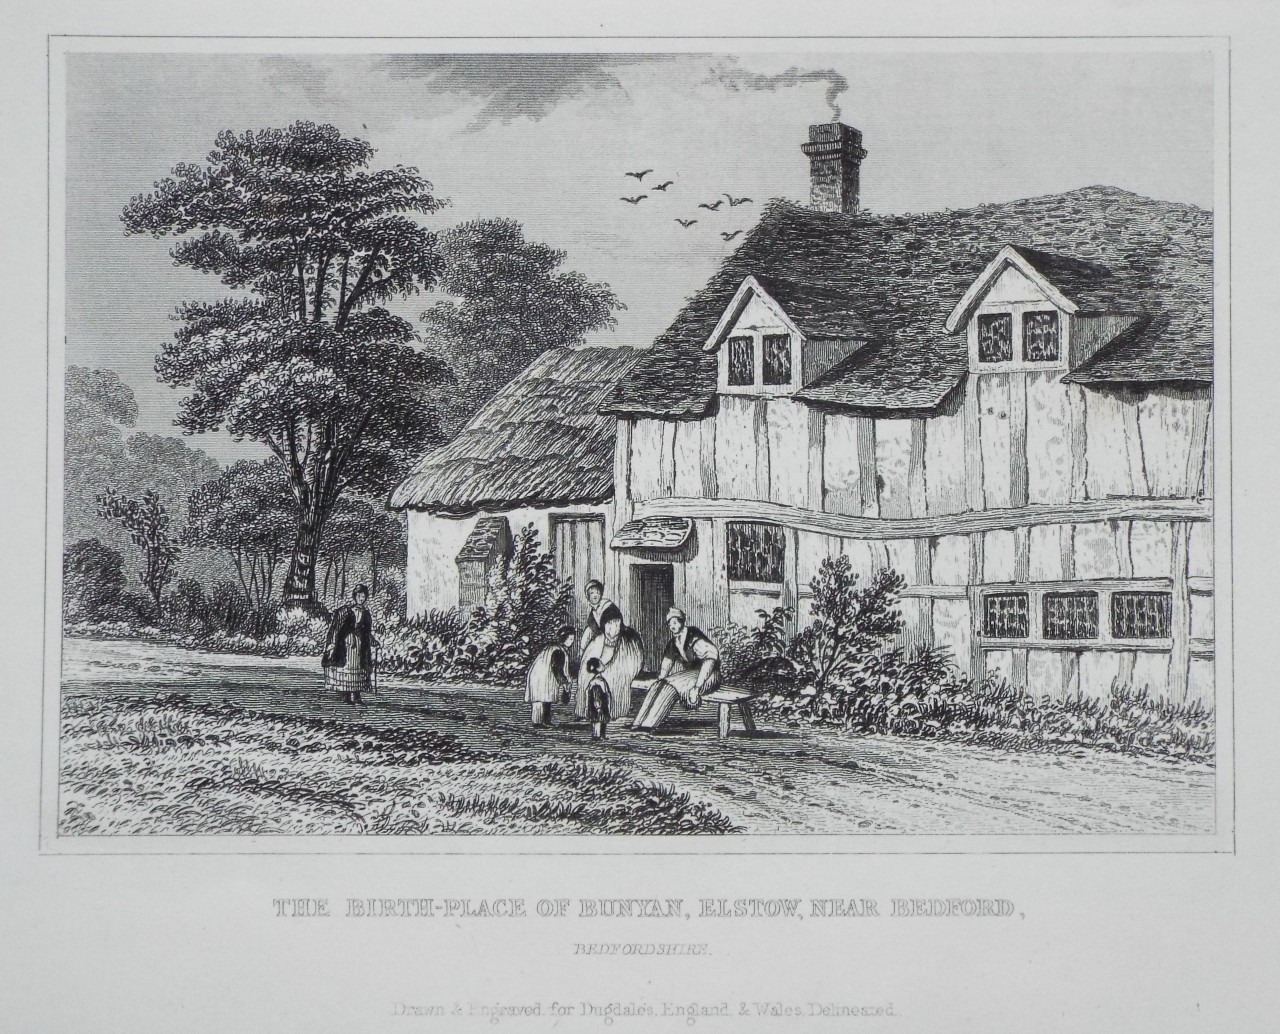 Print - The Birth-place of Bunyan, Elstow, near Bedford. Bedfordshire.